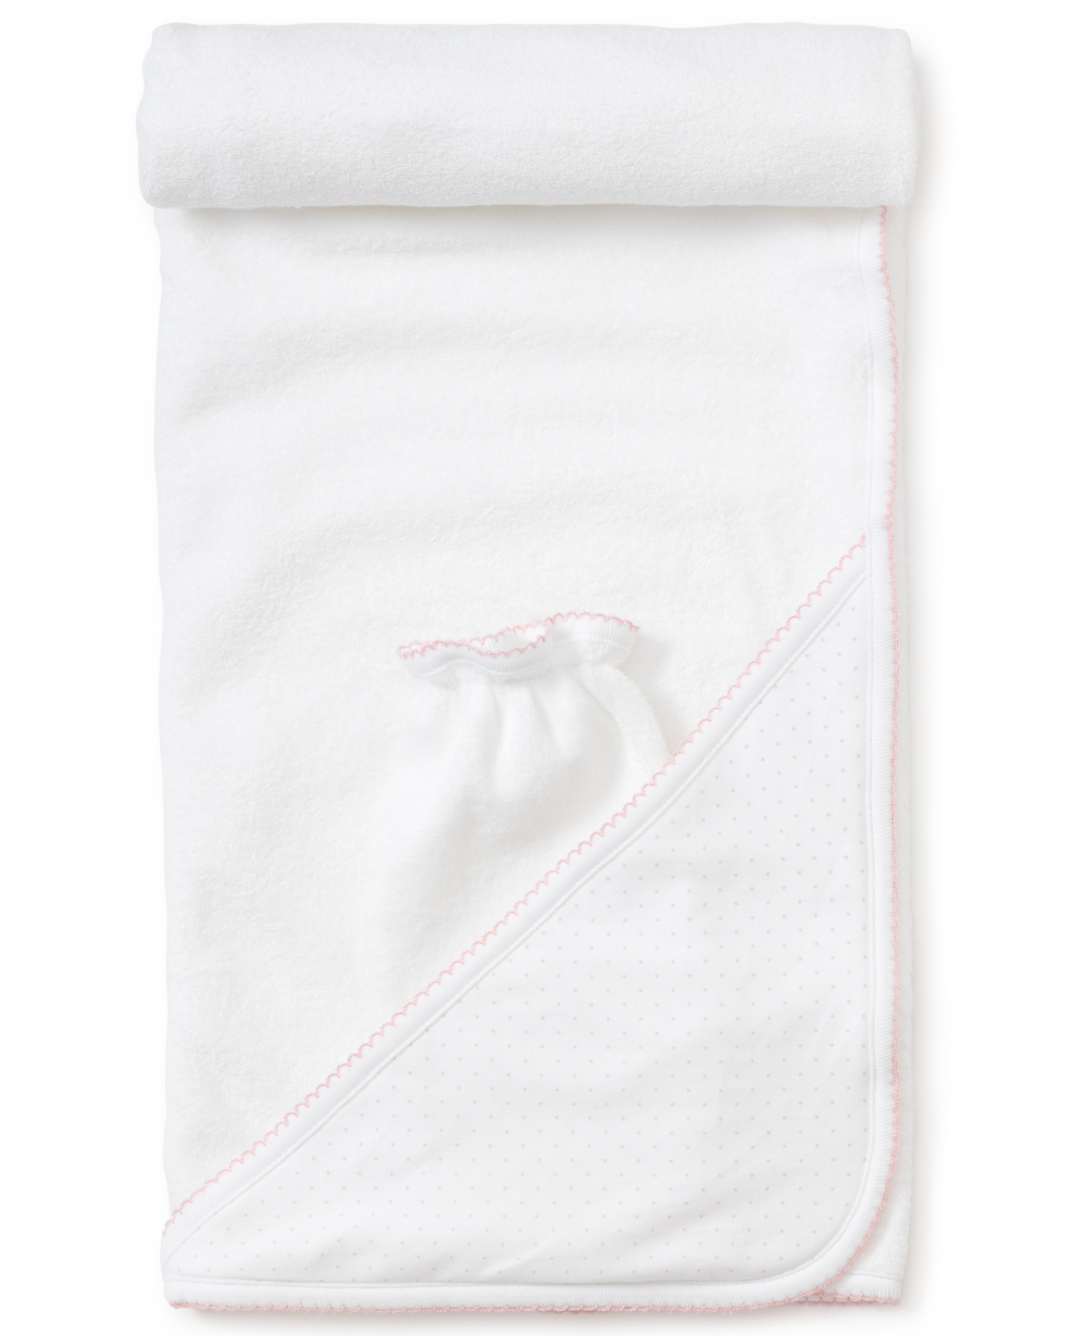 Towel with Mitt, White with Pink Polka Dots